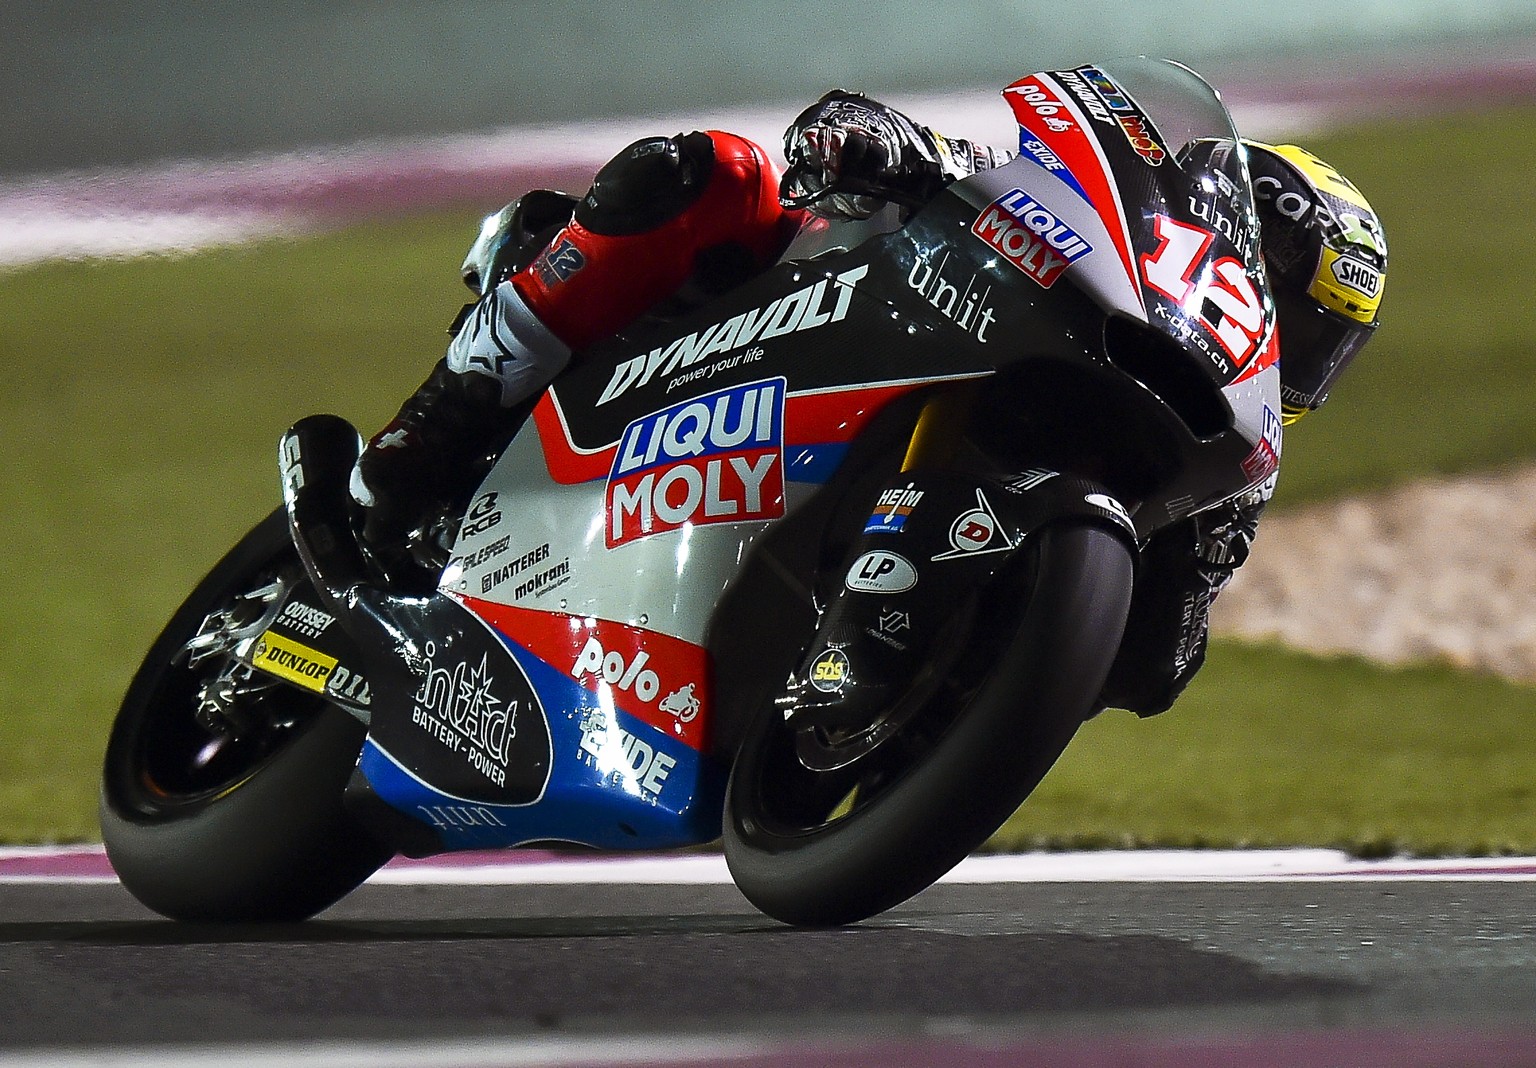 epa08278997 Swiss Moto2 rider Thomas Luthi of the Liqui Moly Intact GP team in action during the Moto2 race at the Motorcycling Grand Prix of Qatar at Losail International Circuit in Doha, Qatar, 08 M ...